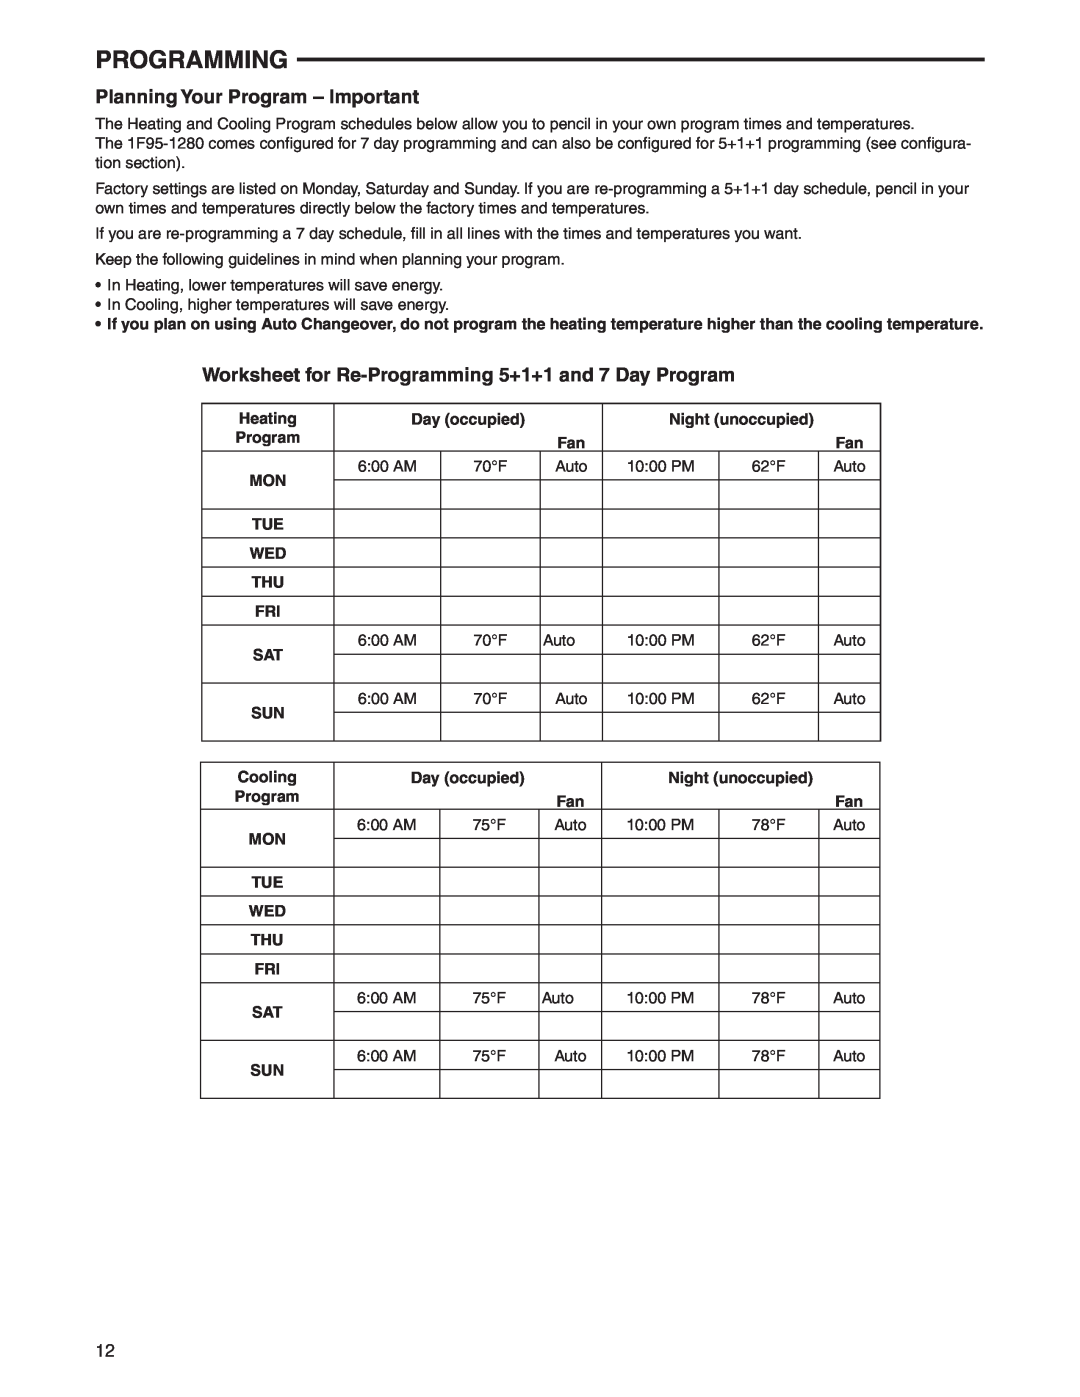 White Rodgers 1F95-1280 Planning Your Program - Important, Worksheet for Re-Programming 5+1+1 and 7 Day Program 